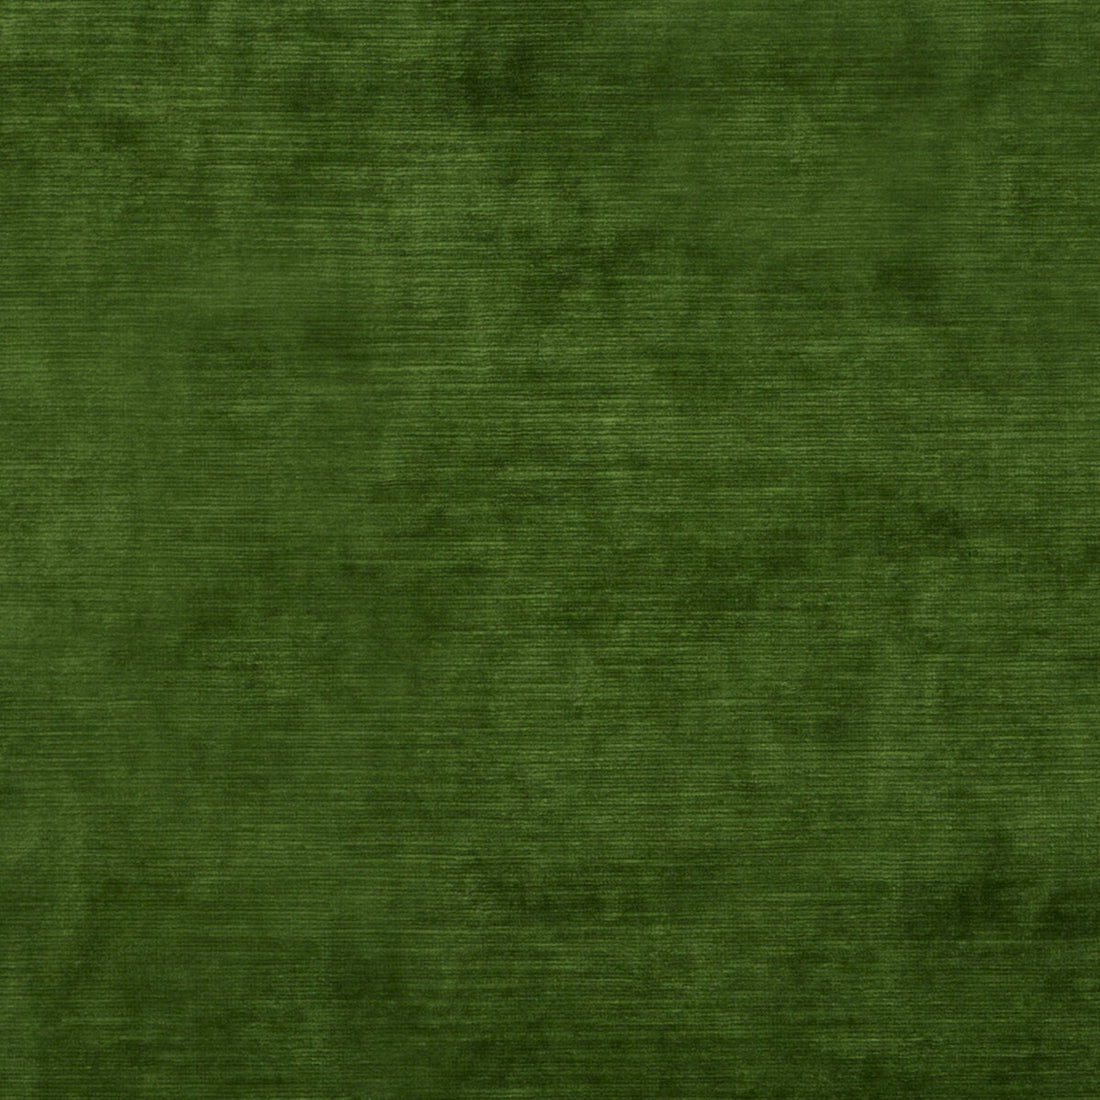 Meridian Velvet fabric in emerald color - pattern ED85292.785.0 - by Threads in the Meridian collection